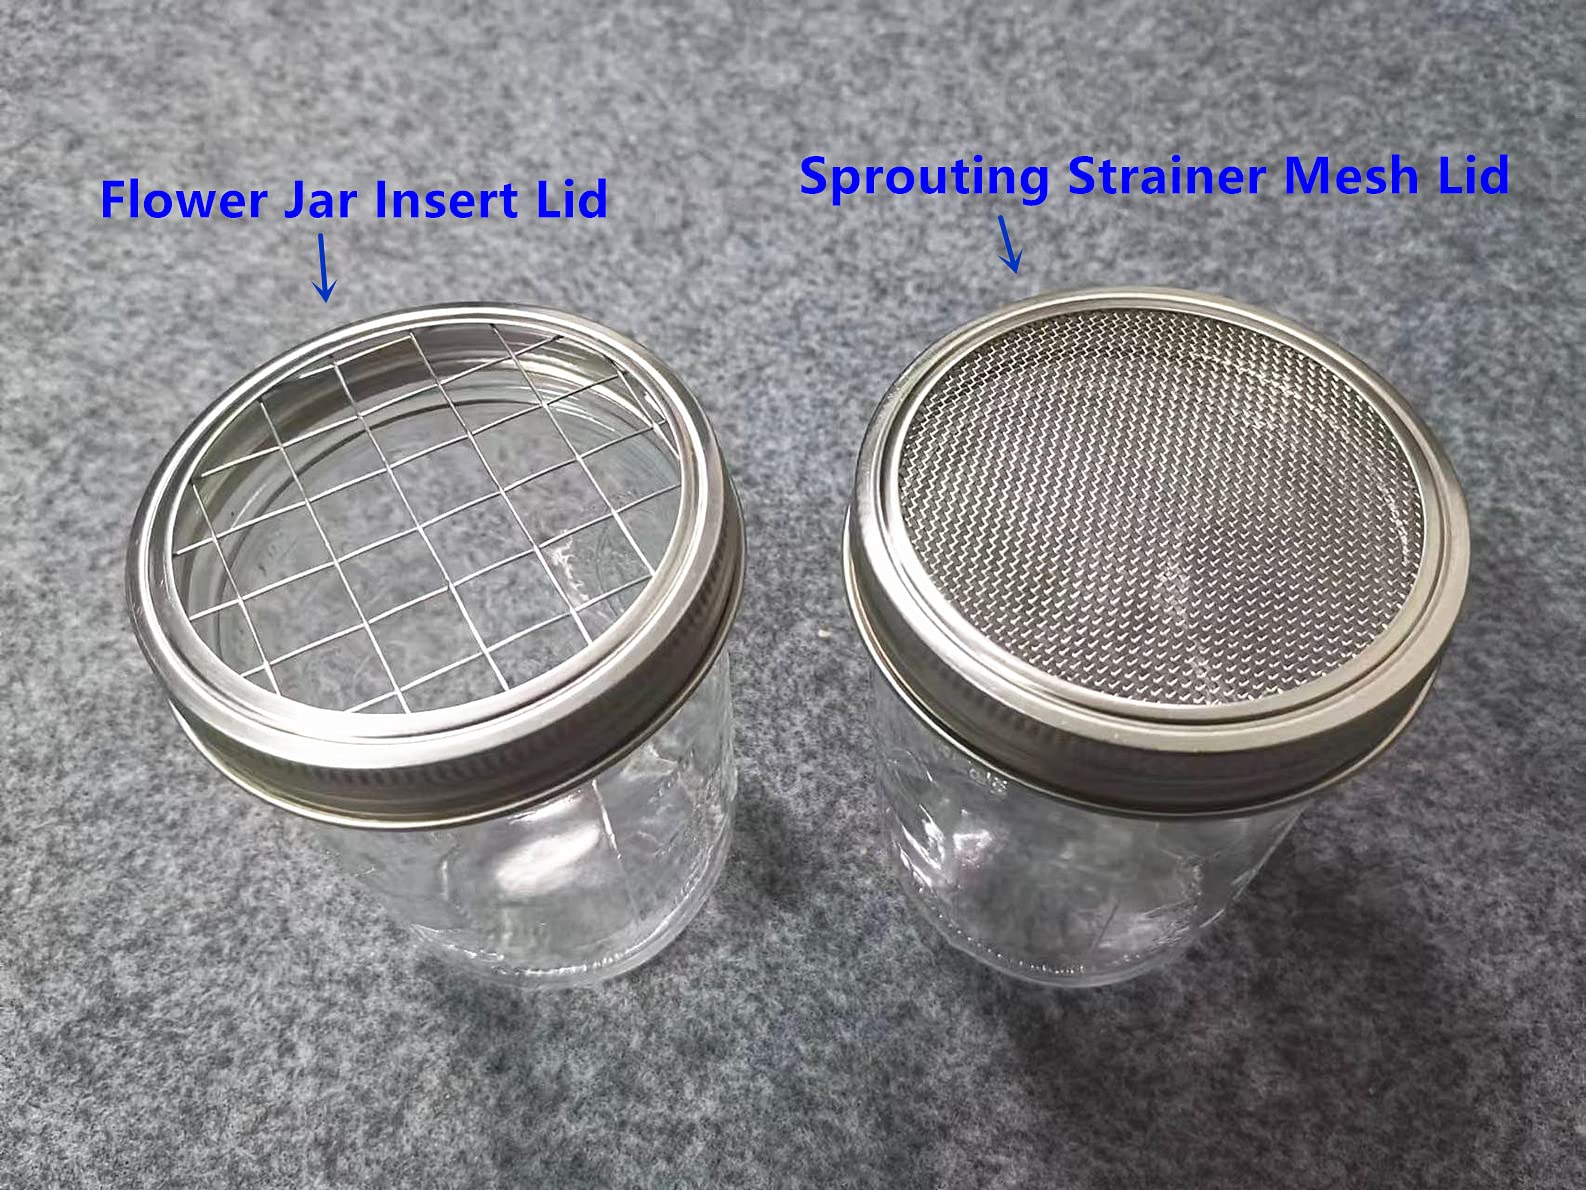 6 Pieces Mason Jar Wide Mouth Mesh Strainer Sprouting Lids Stainless Steel Flower Jar Insert Lids for Canning Jars Seed Sprouting Salad Sprouts & Flower Organizer Insert Lid Kit